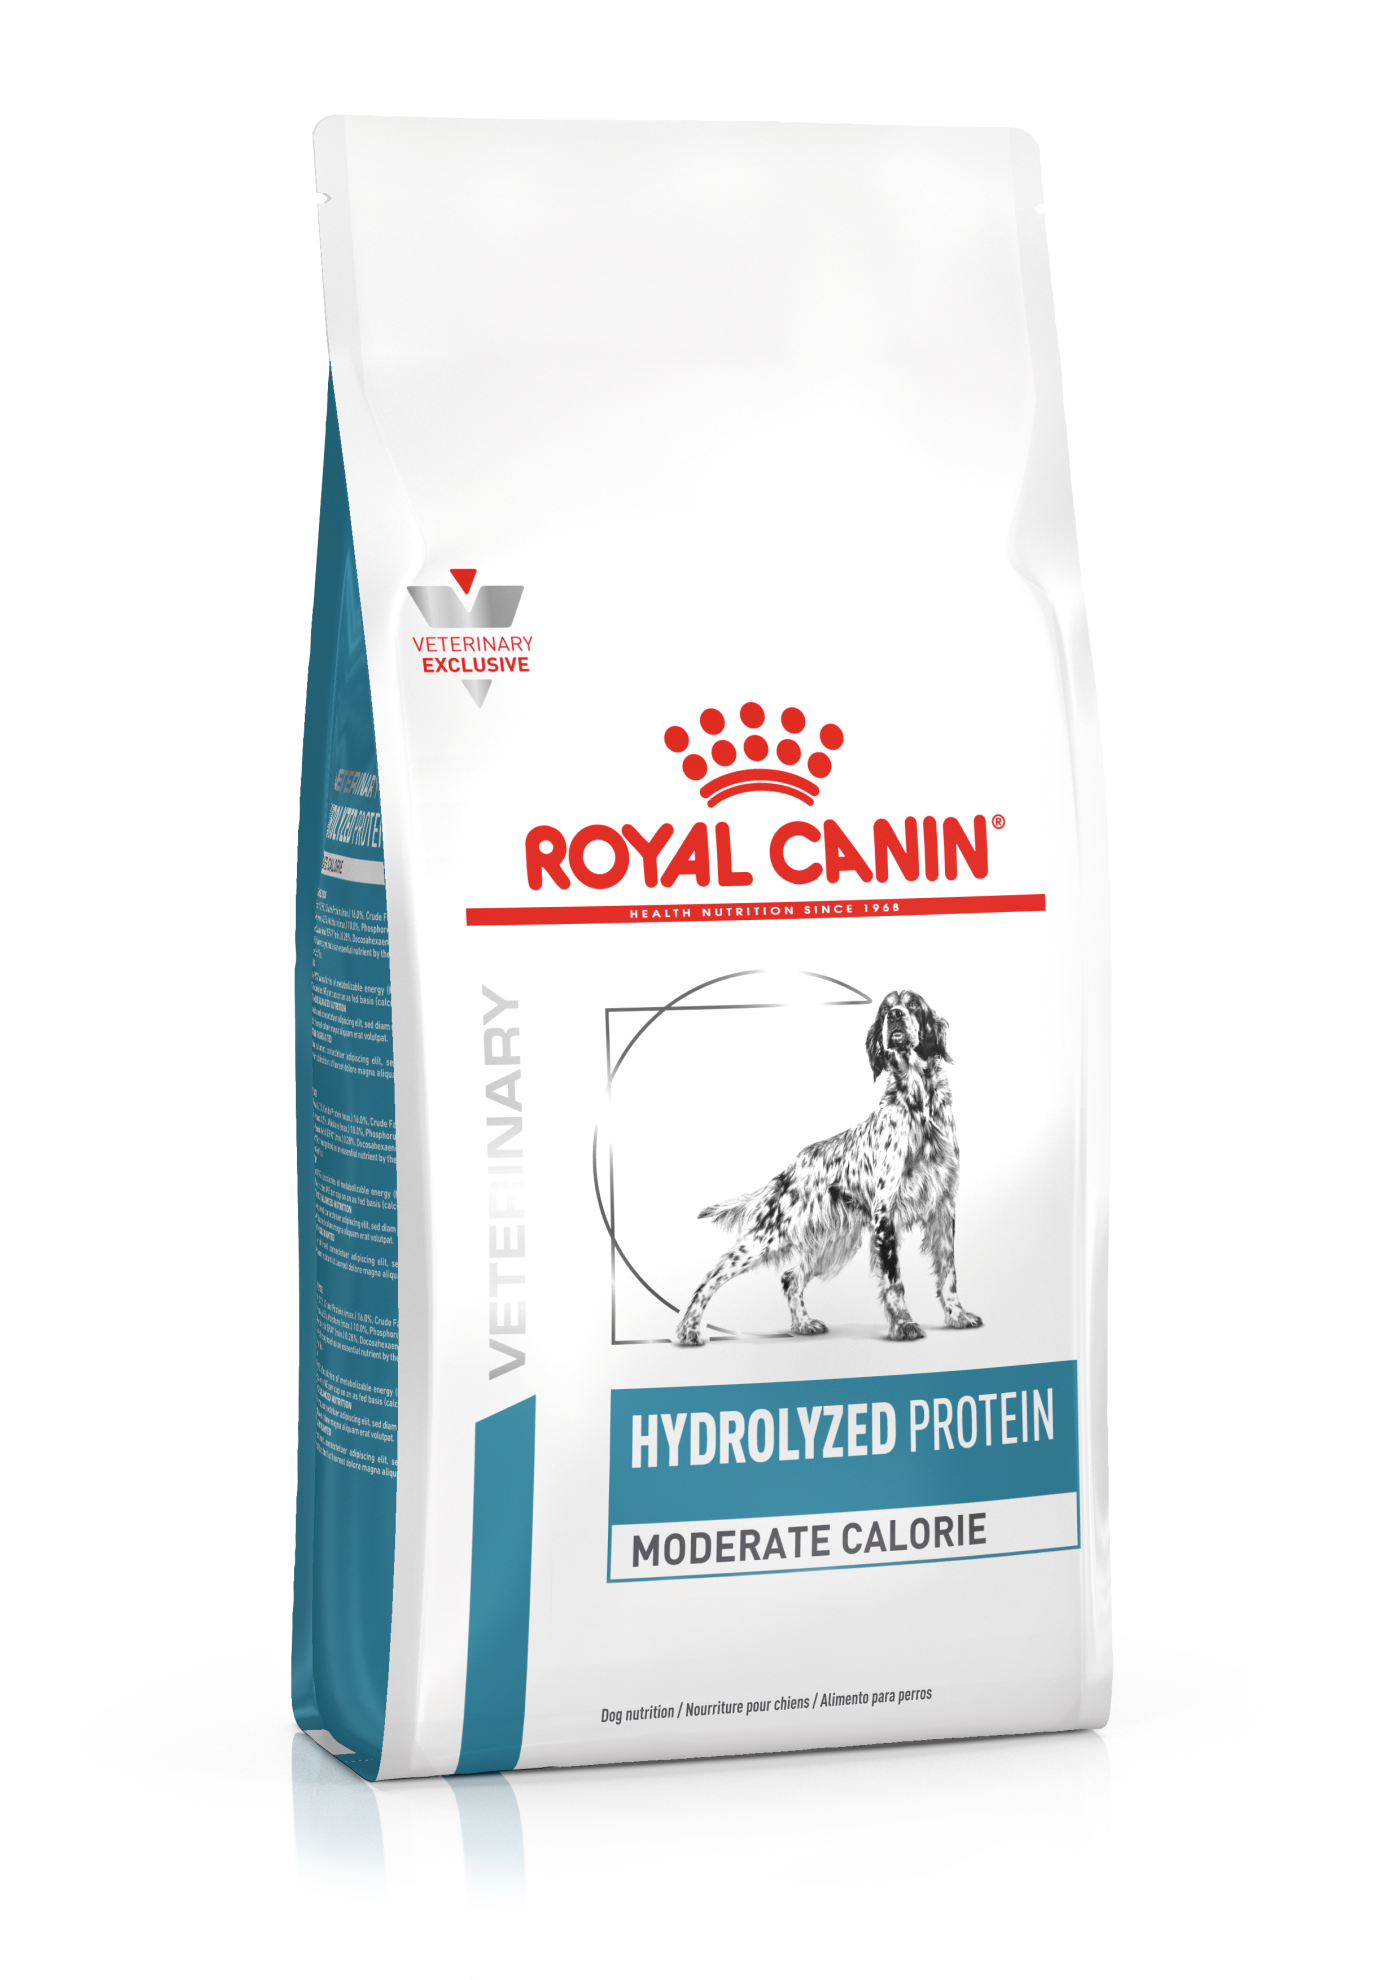 Hydrolyzed Protein Moderate Calorie